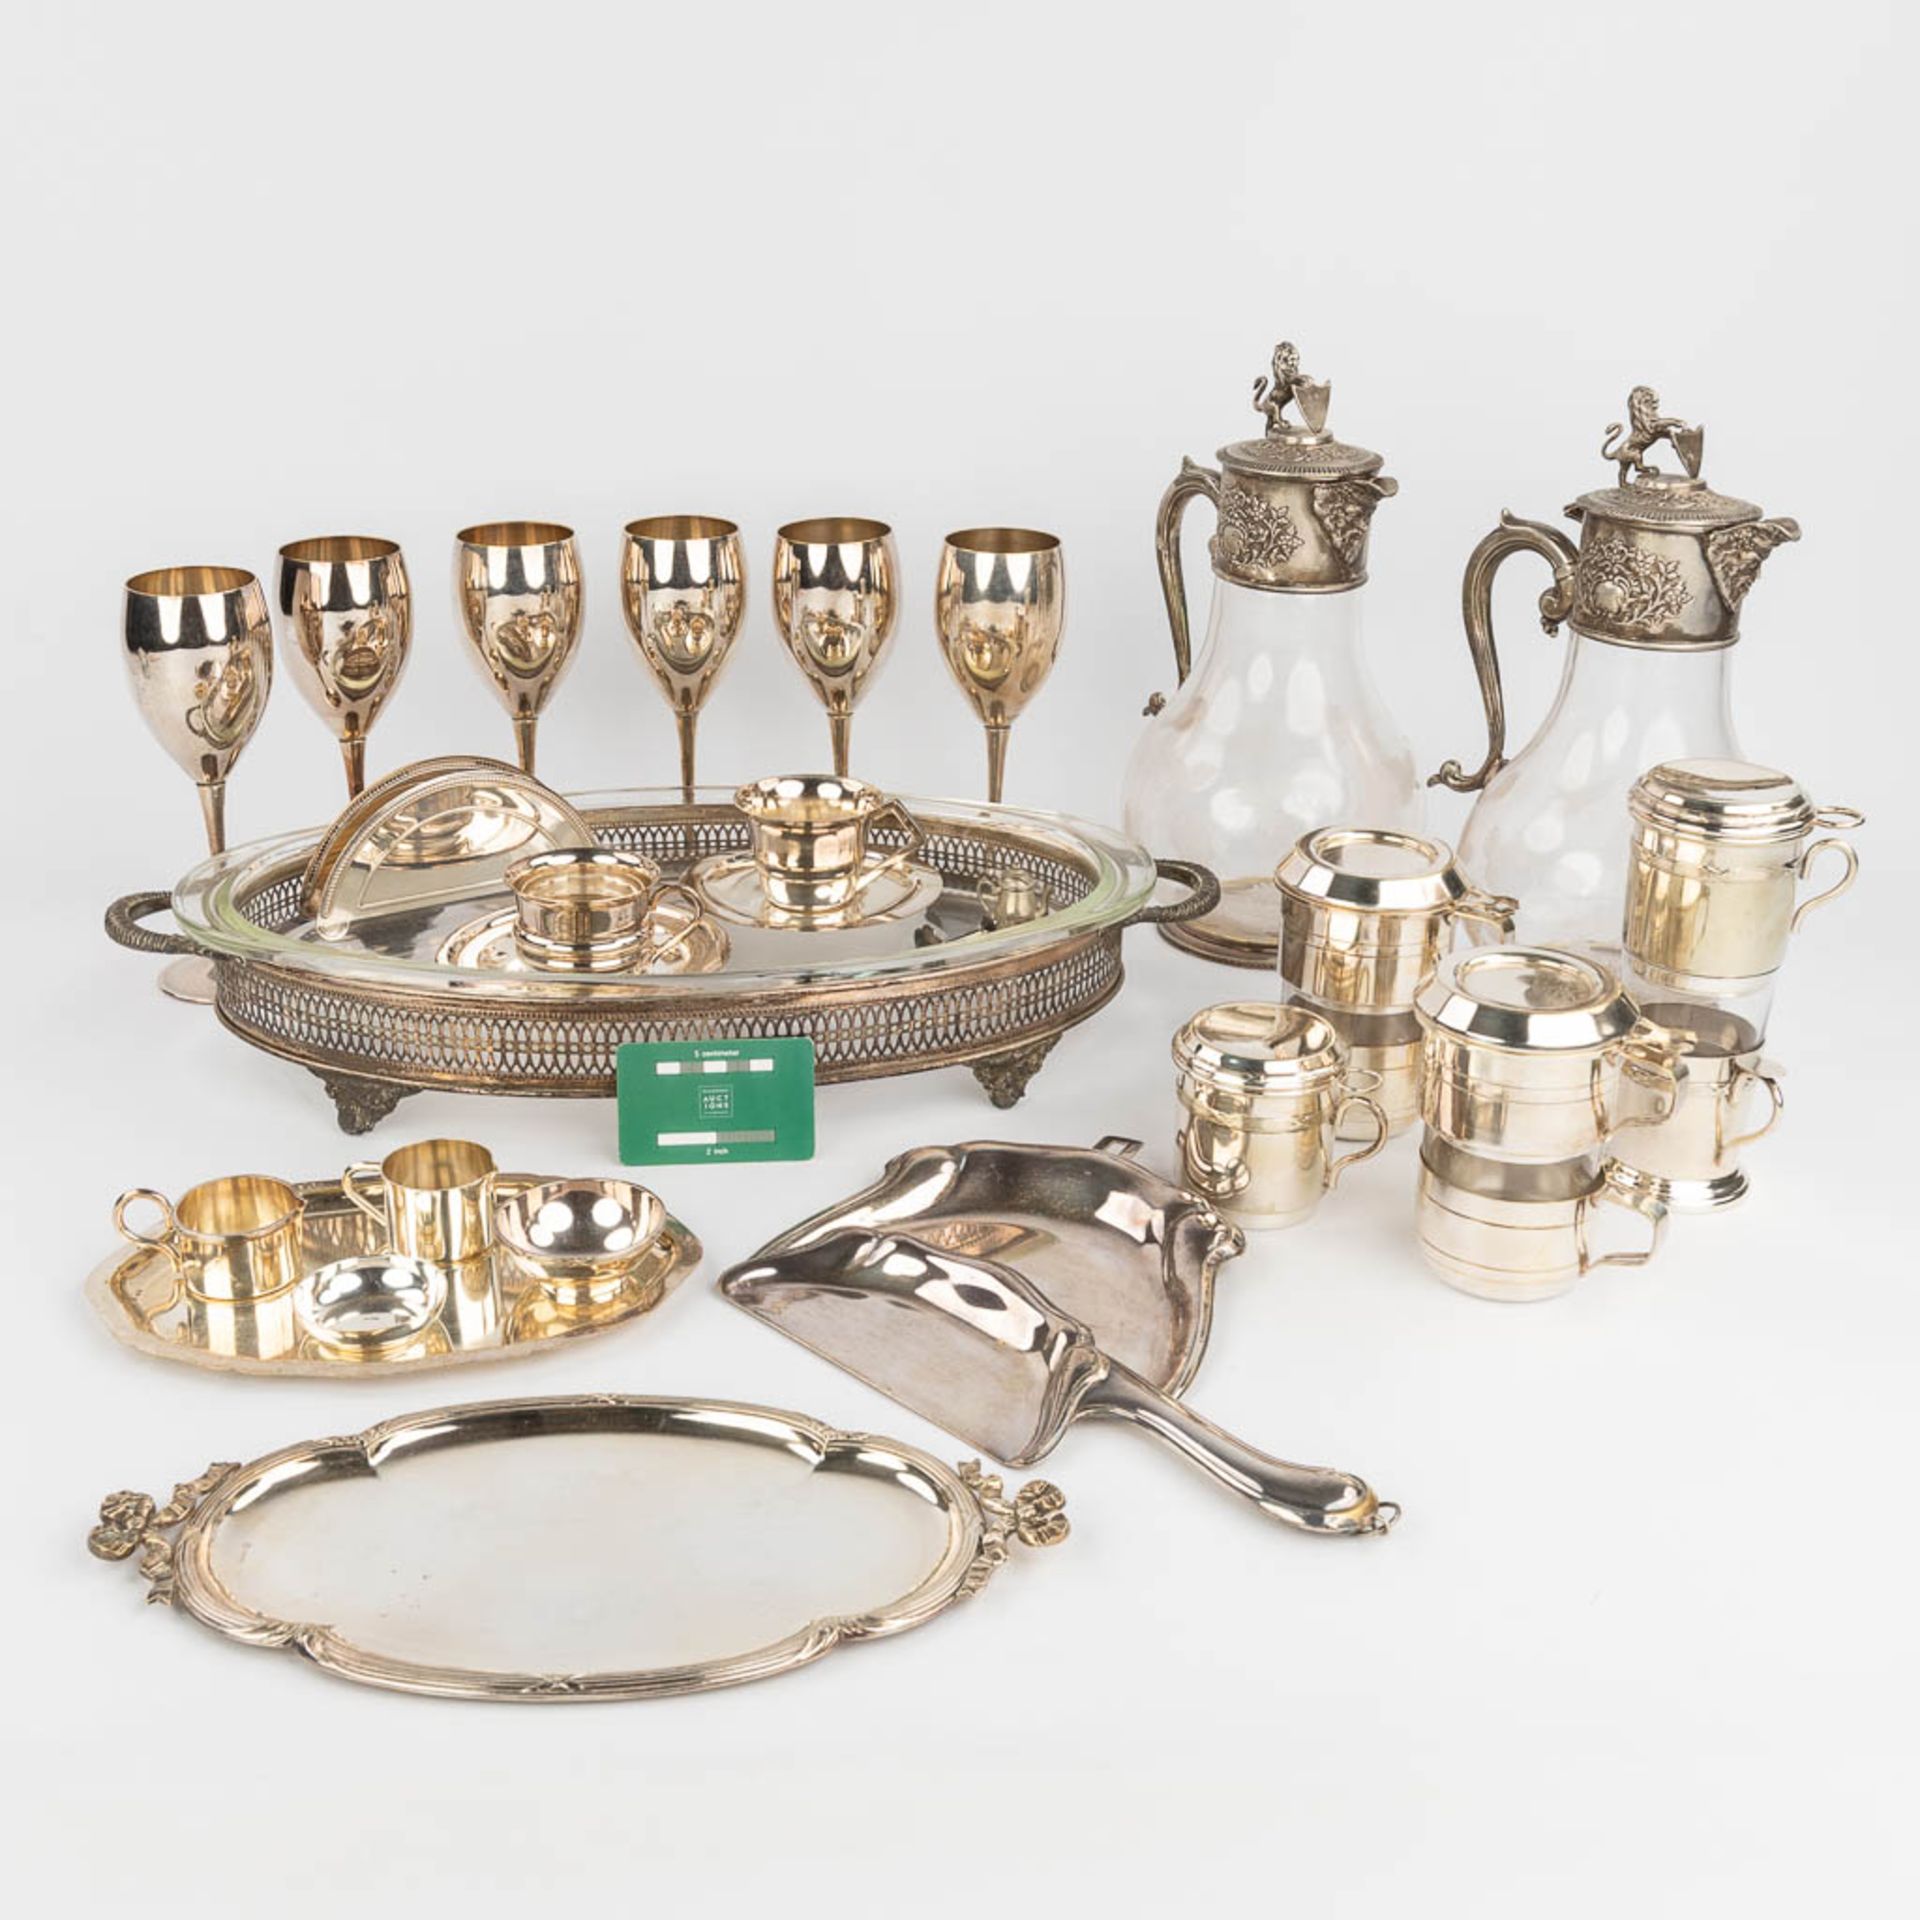 A big collection of silver-plated metal items and accessories. 20th C. (15 x 18 x 30cm) - Image 12 of 15